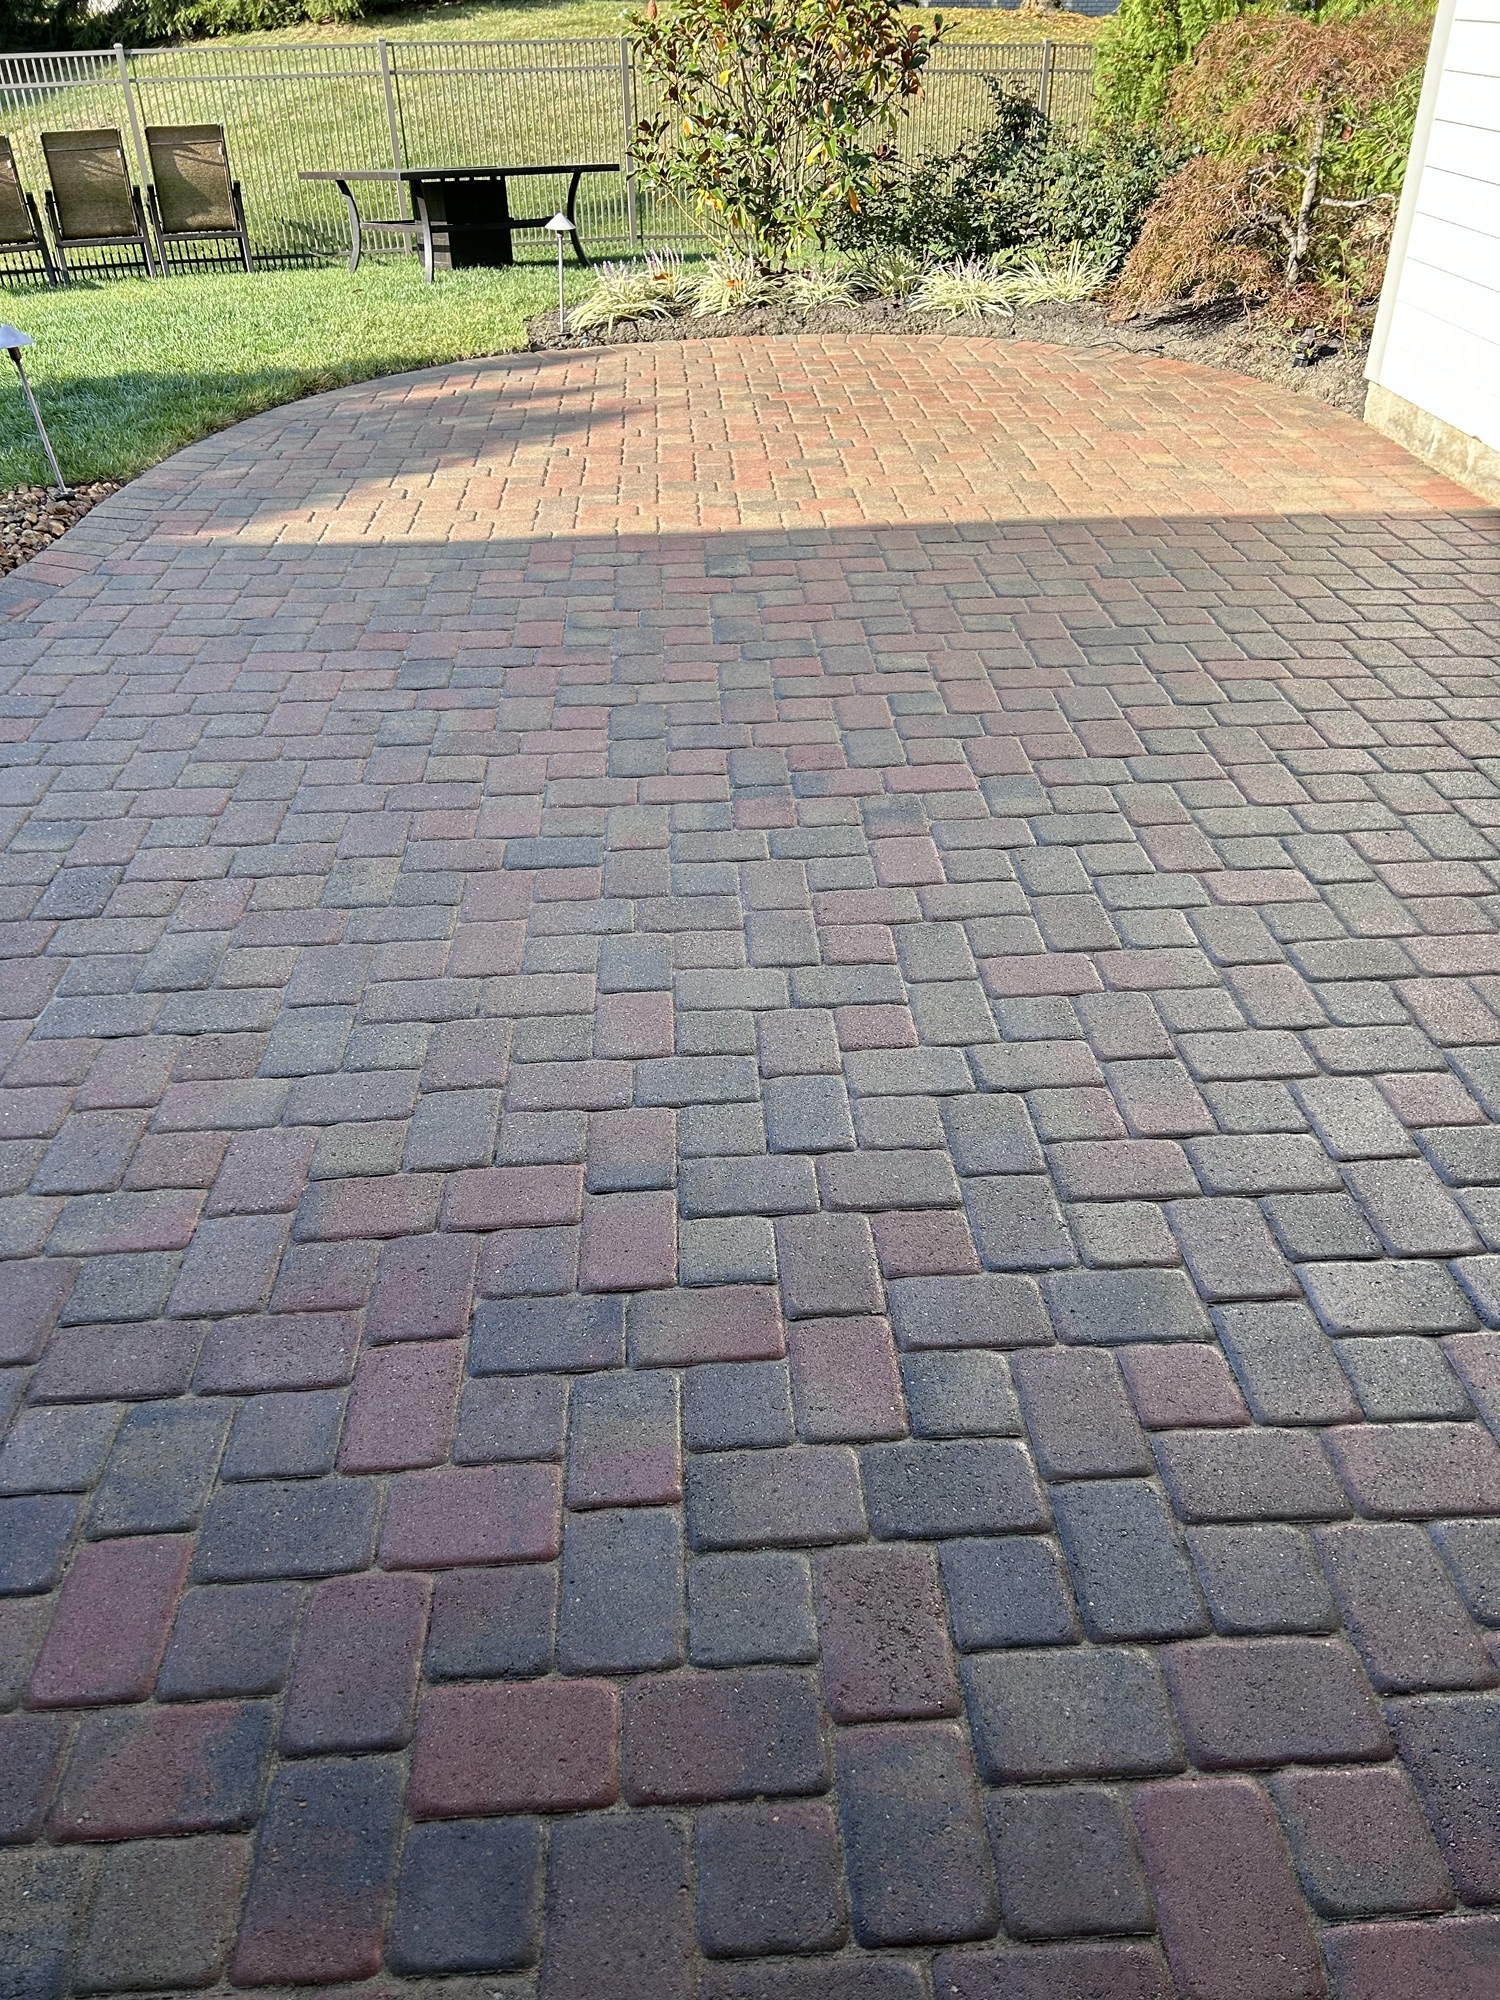 Freshly sealed pavers after having failed sealer stripped